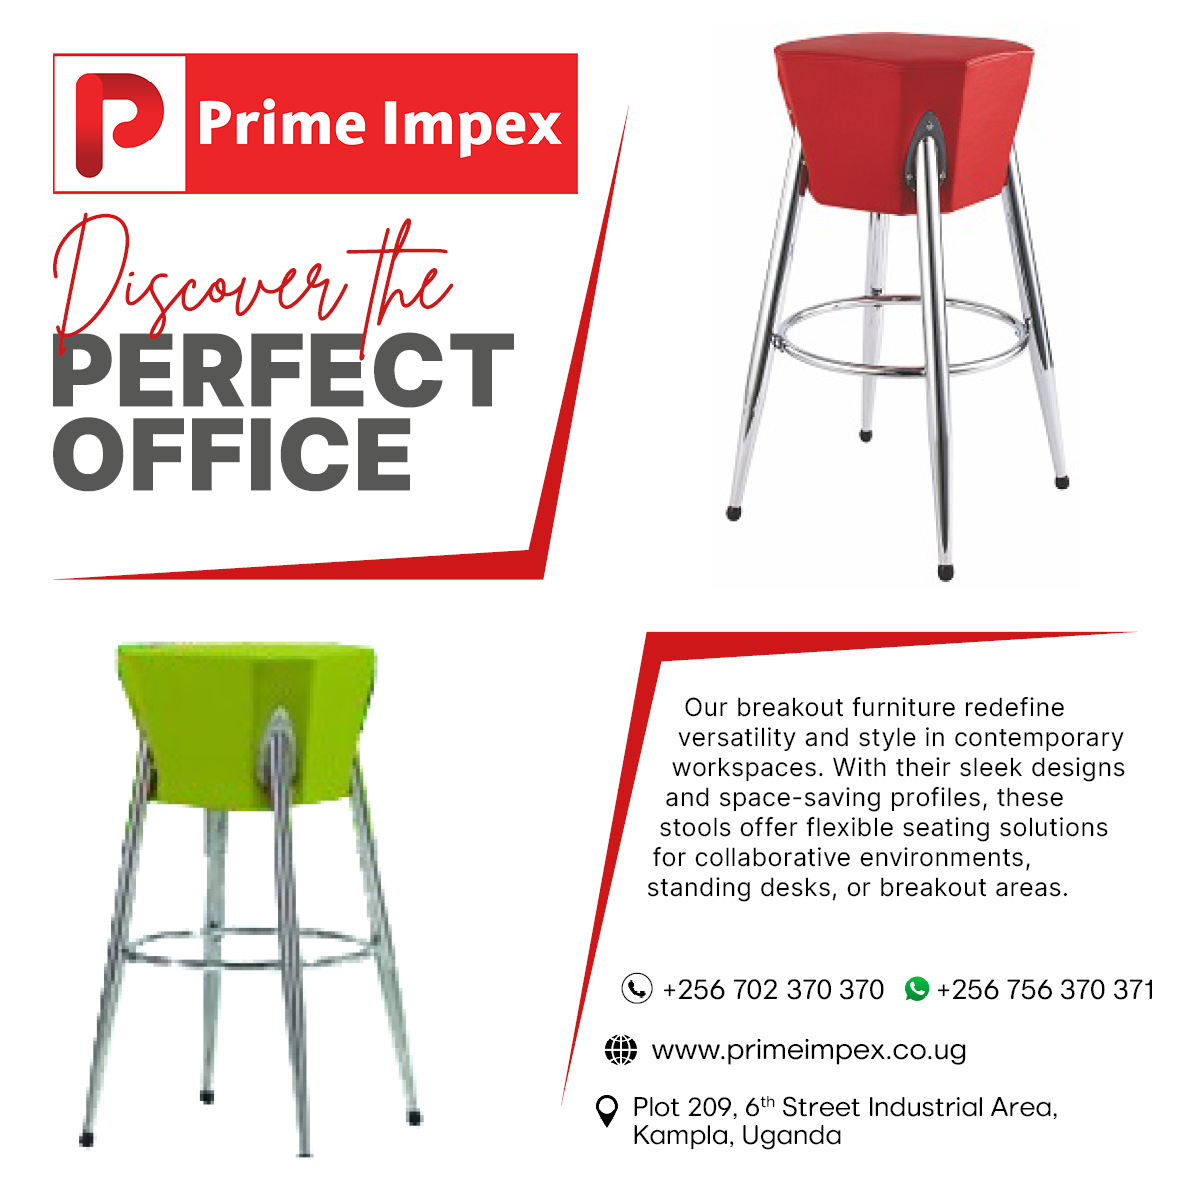 Boost mobility in your workspace with our dynamic office stools! Ideal for collaborative areas, they keep you moving and engaged. 

Visit us for a FREE Interior Design Consultation! 😃 

#OfficeStools #Flexibility #ModernOffice #PrimeImpex #Kampala